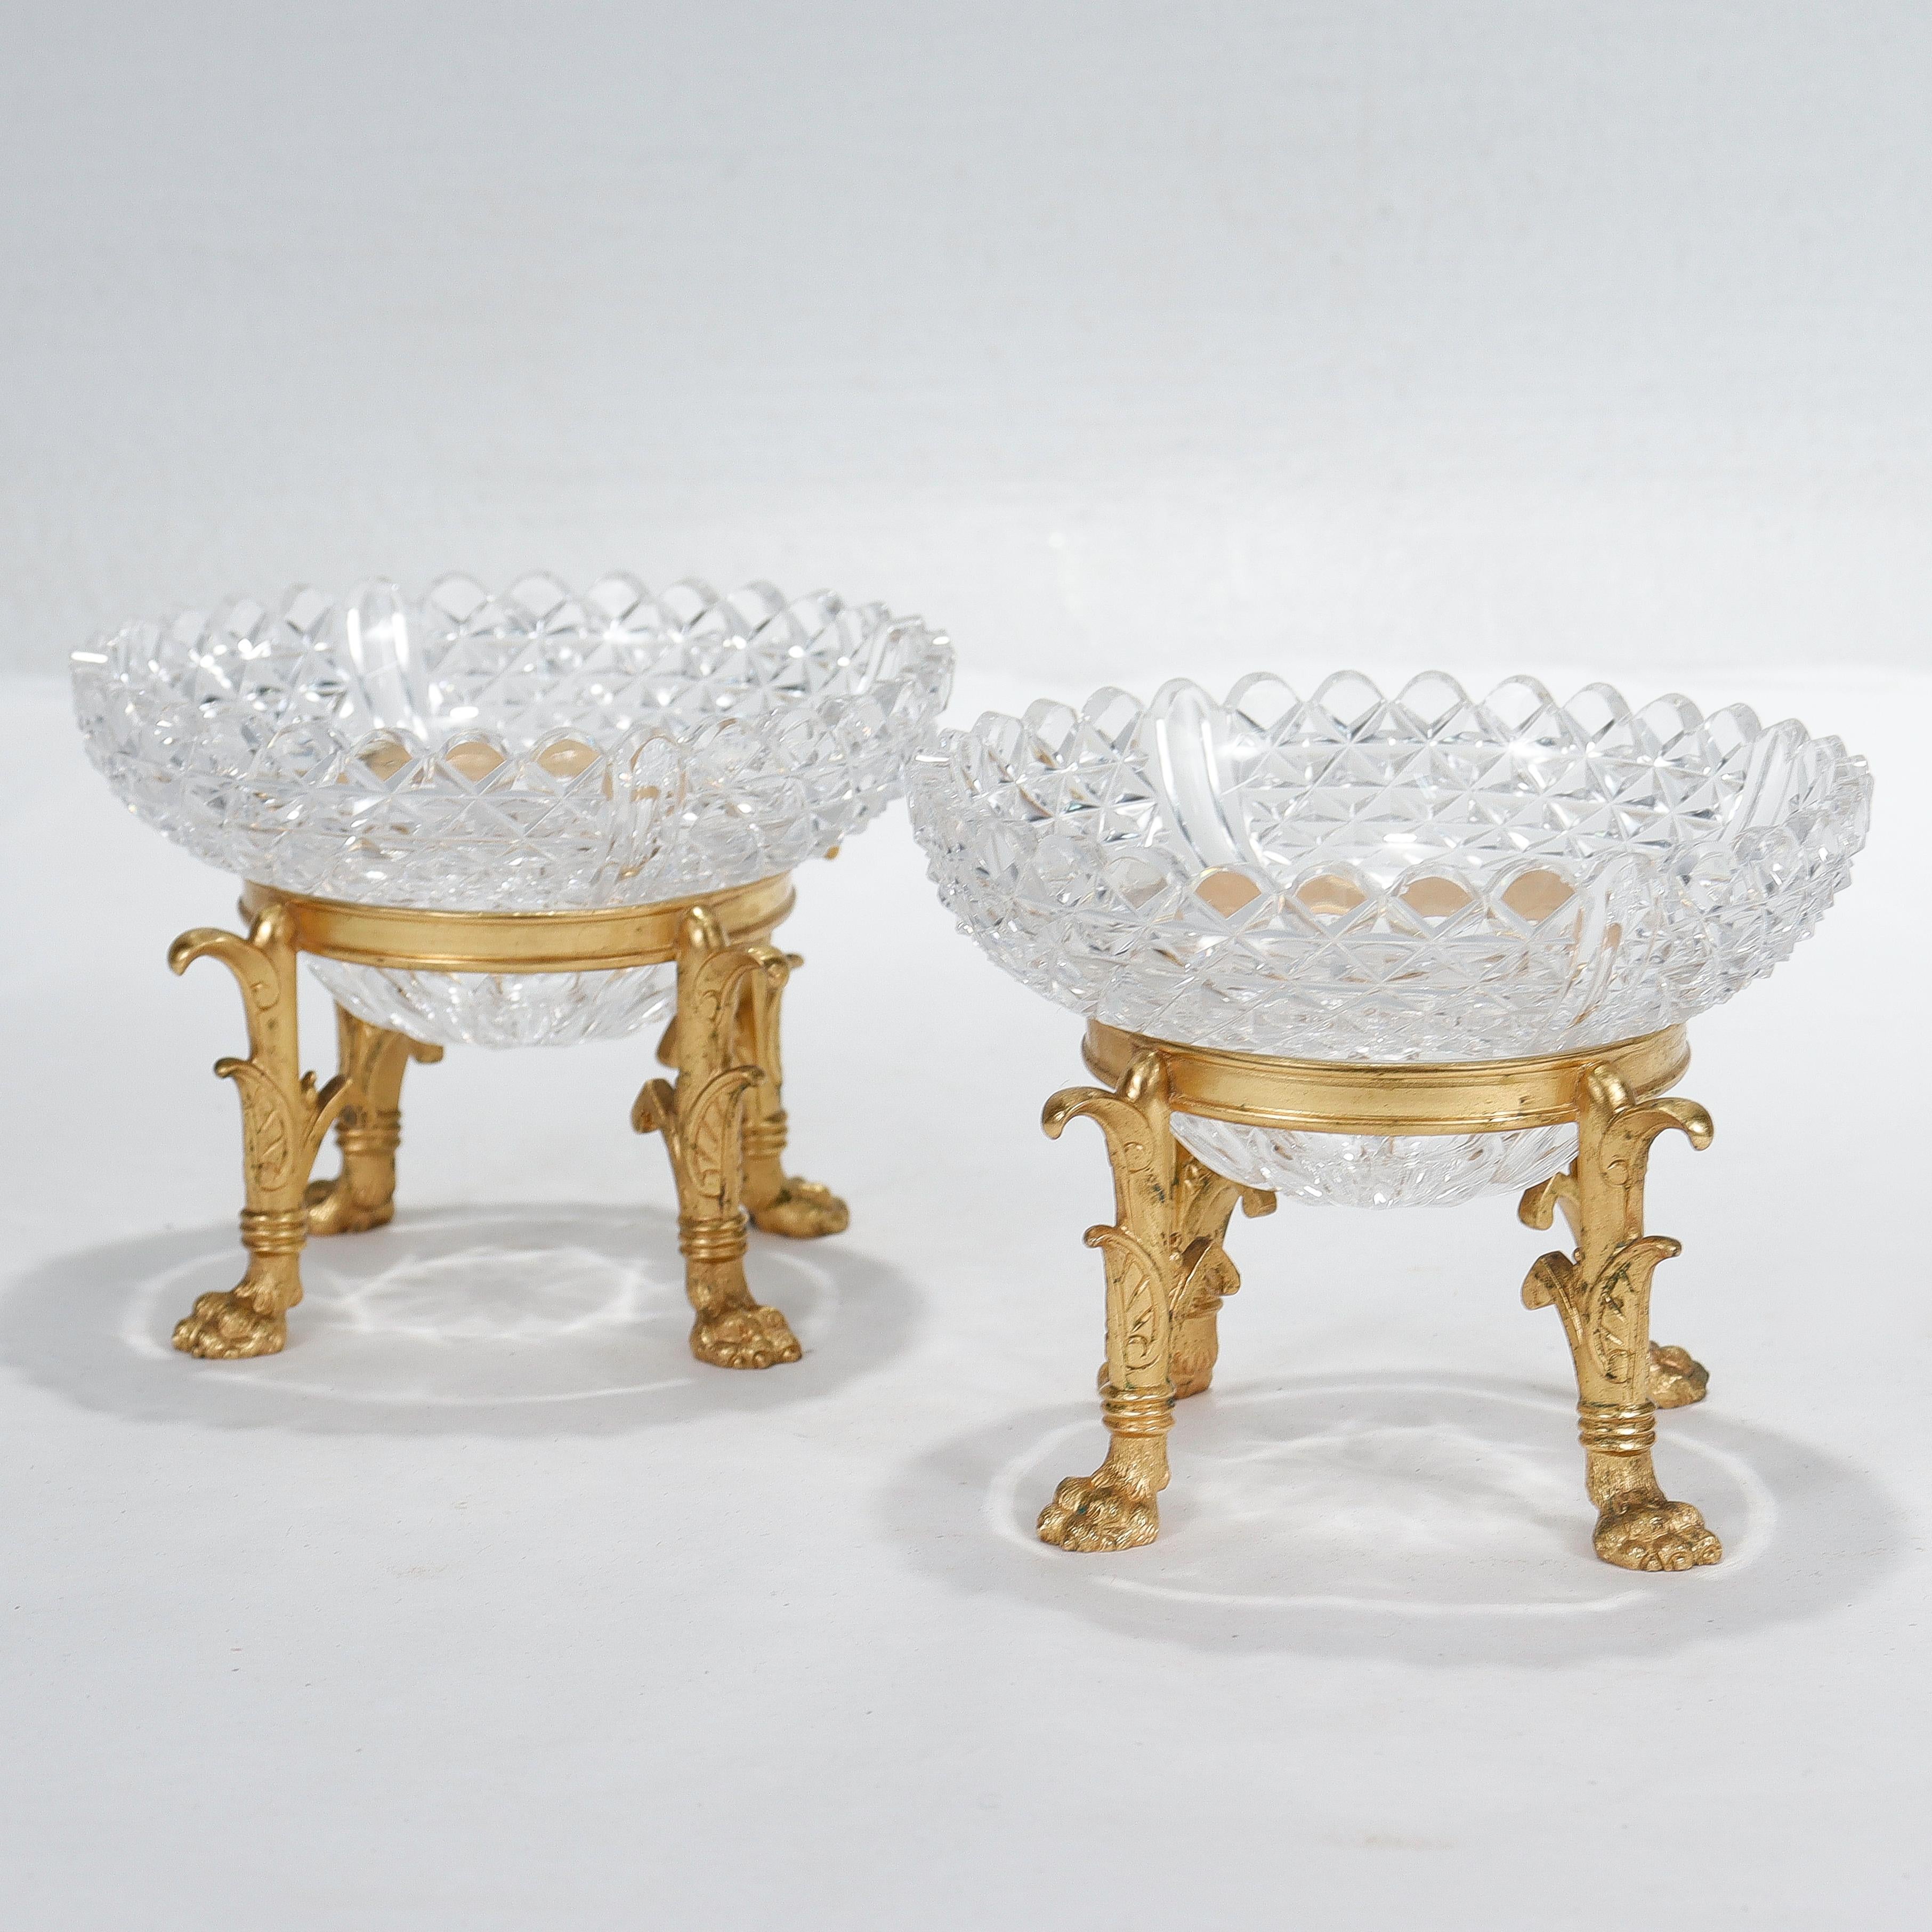 Egyptian Revival Pair of Gilt Bronze & Cut Glass Footed Bowls Attributed to F. & C. Osler